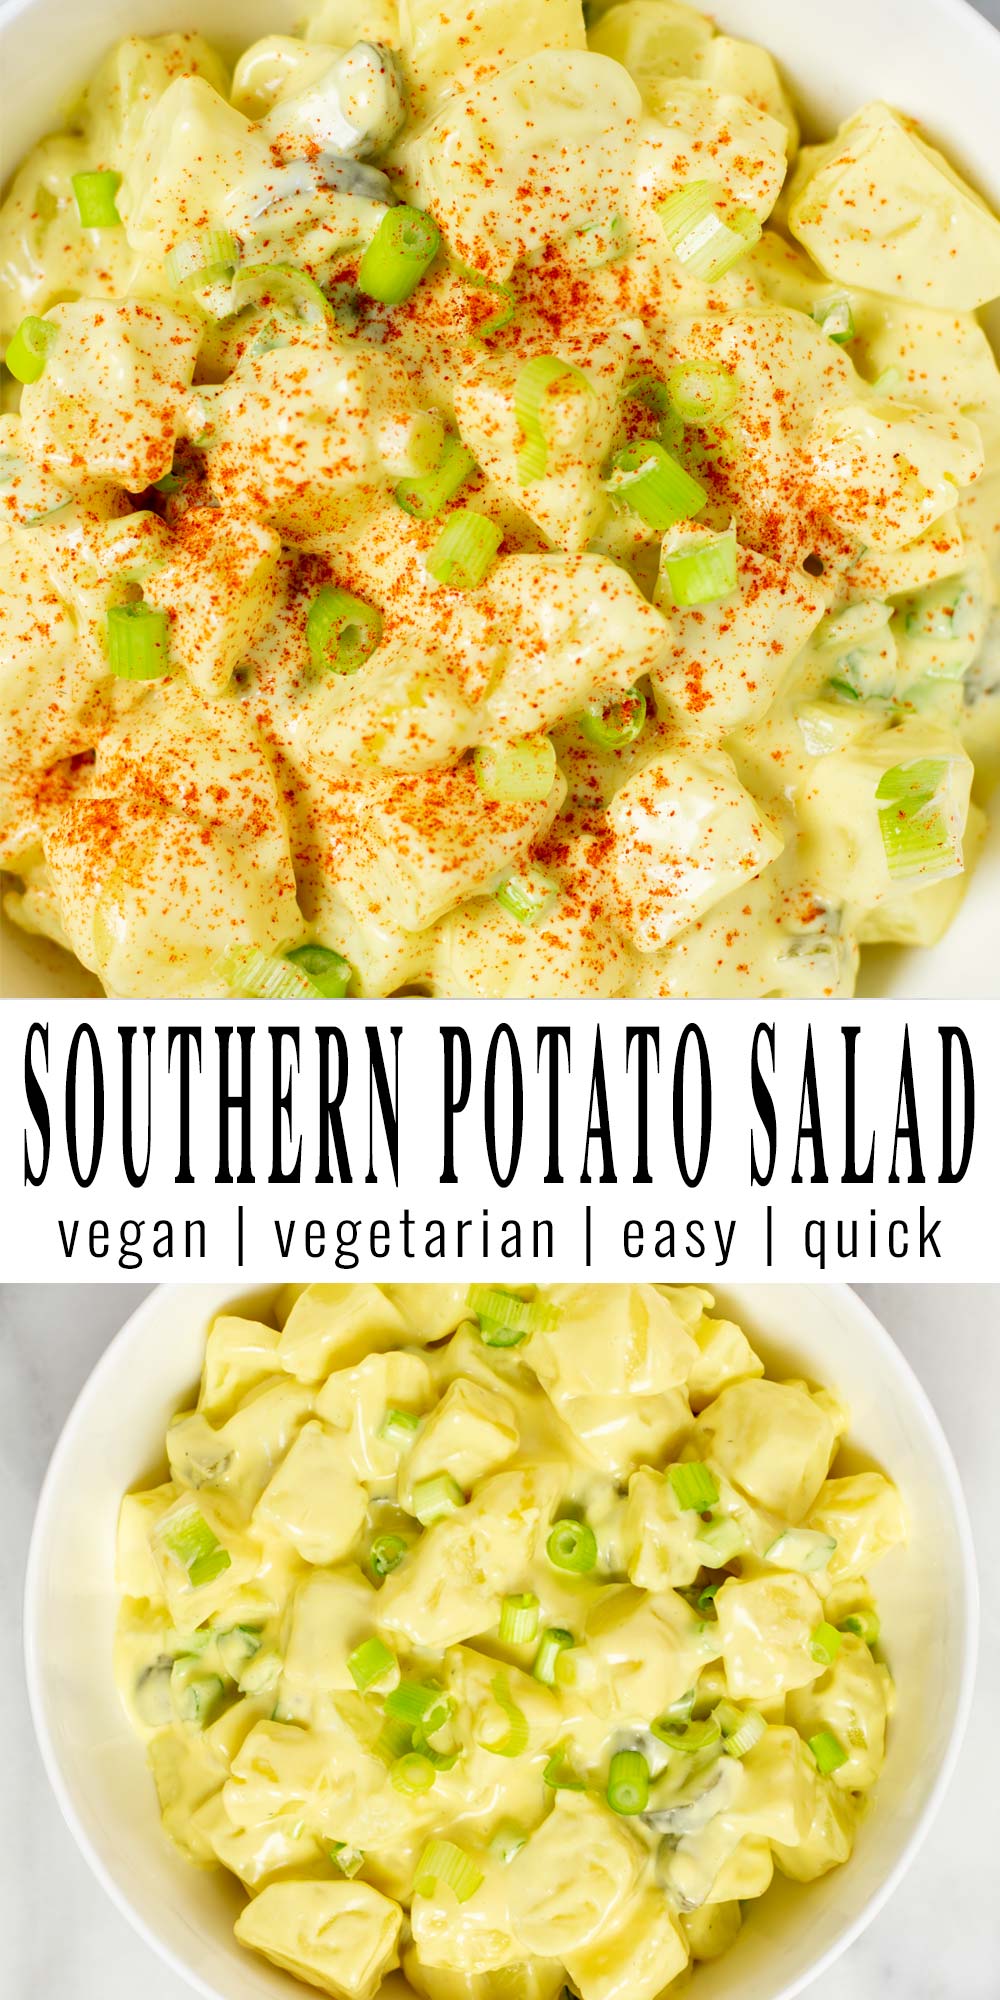 Collage of two pictures of the Southern Potato Salad with recipe title text.